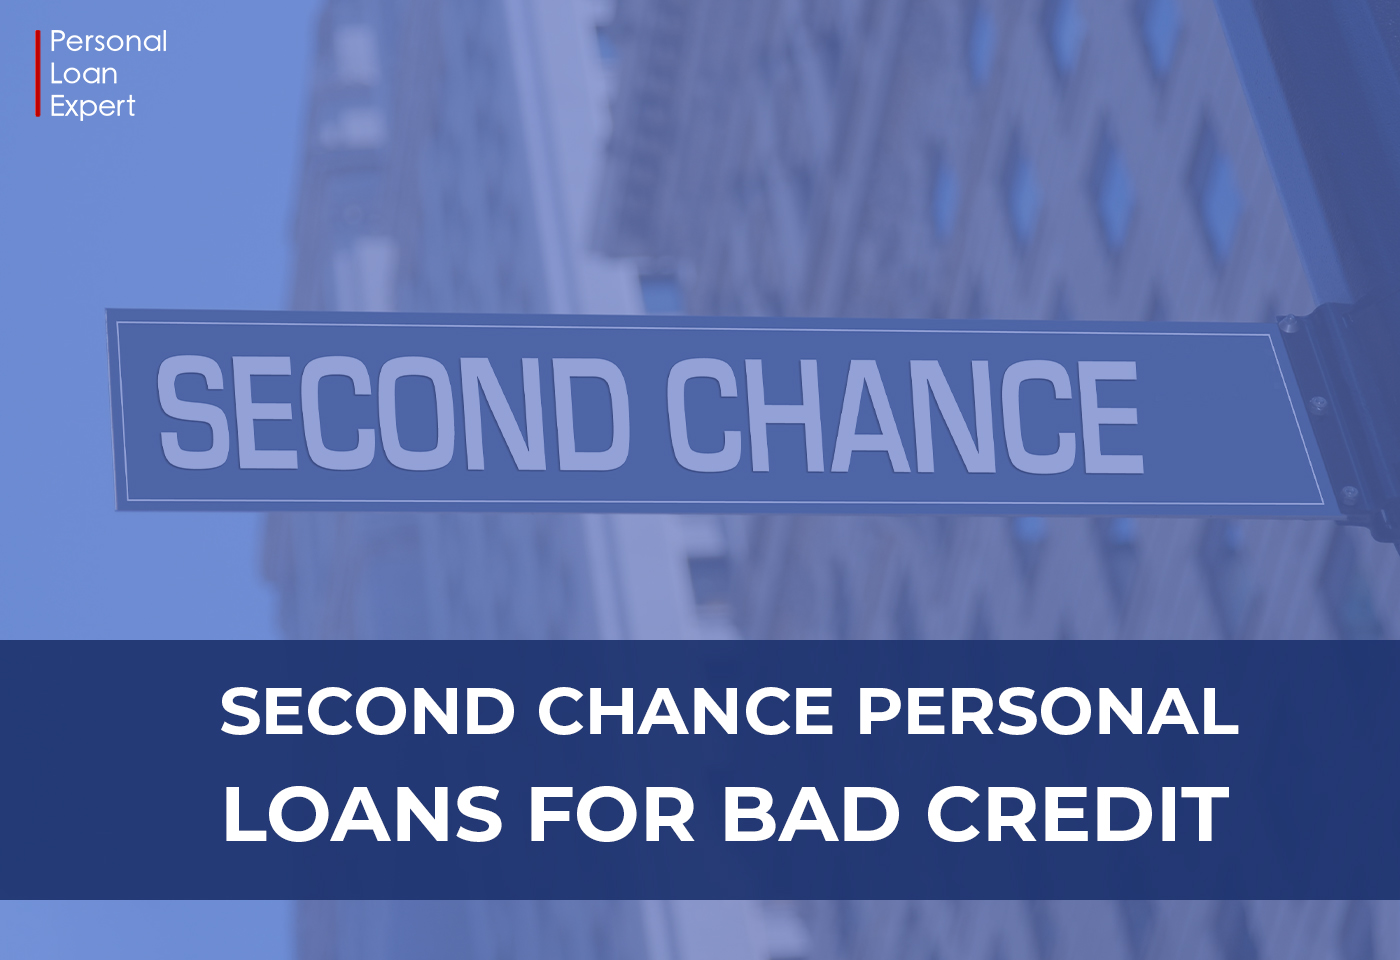 Second Chance Personal Loans for Bad Credit